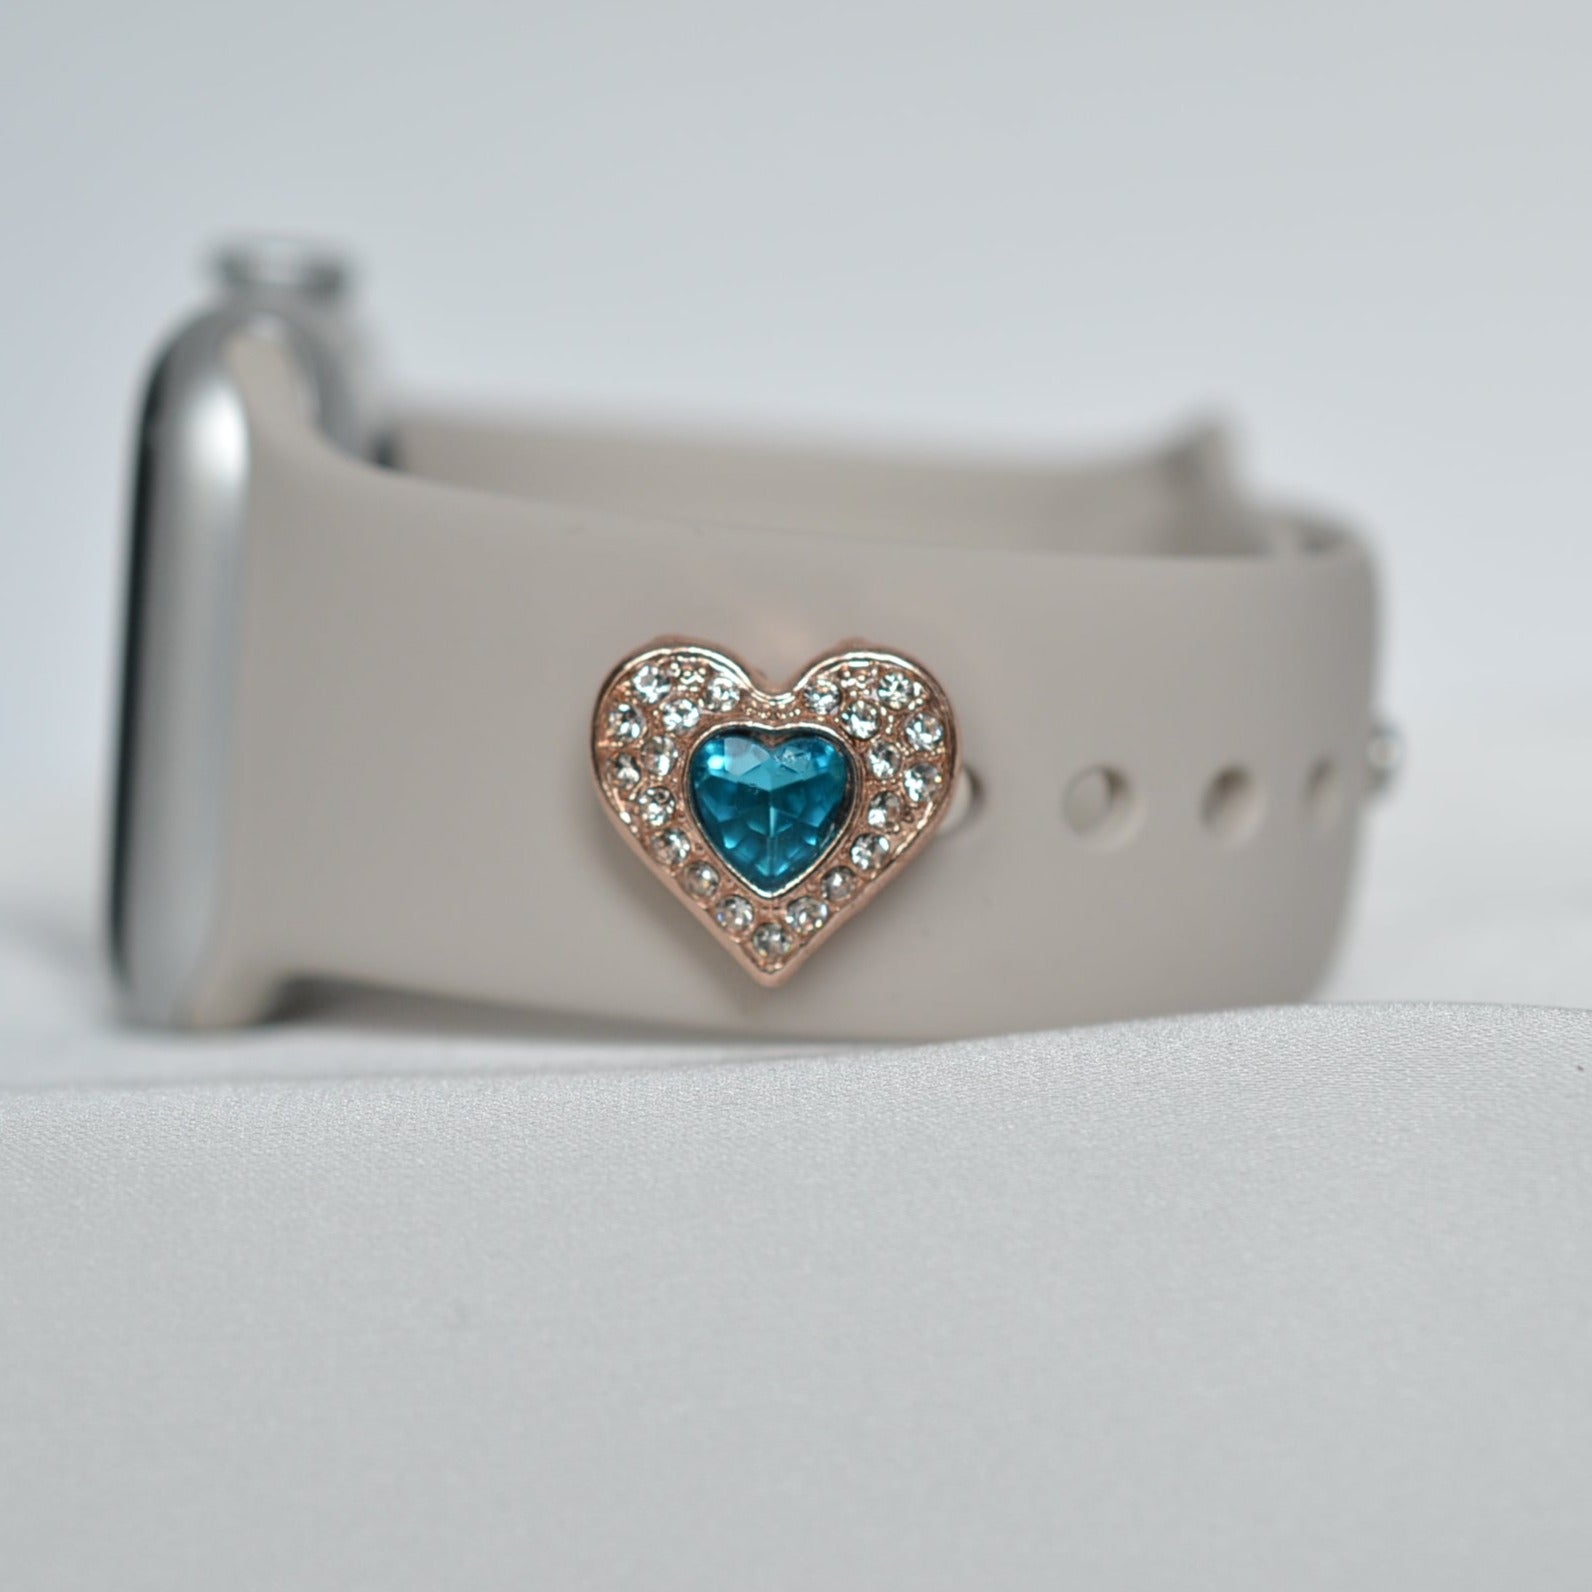 Blue Heart with Gold Trim Charm for Belts, Bags and Watch Bands